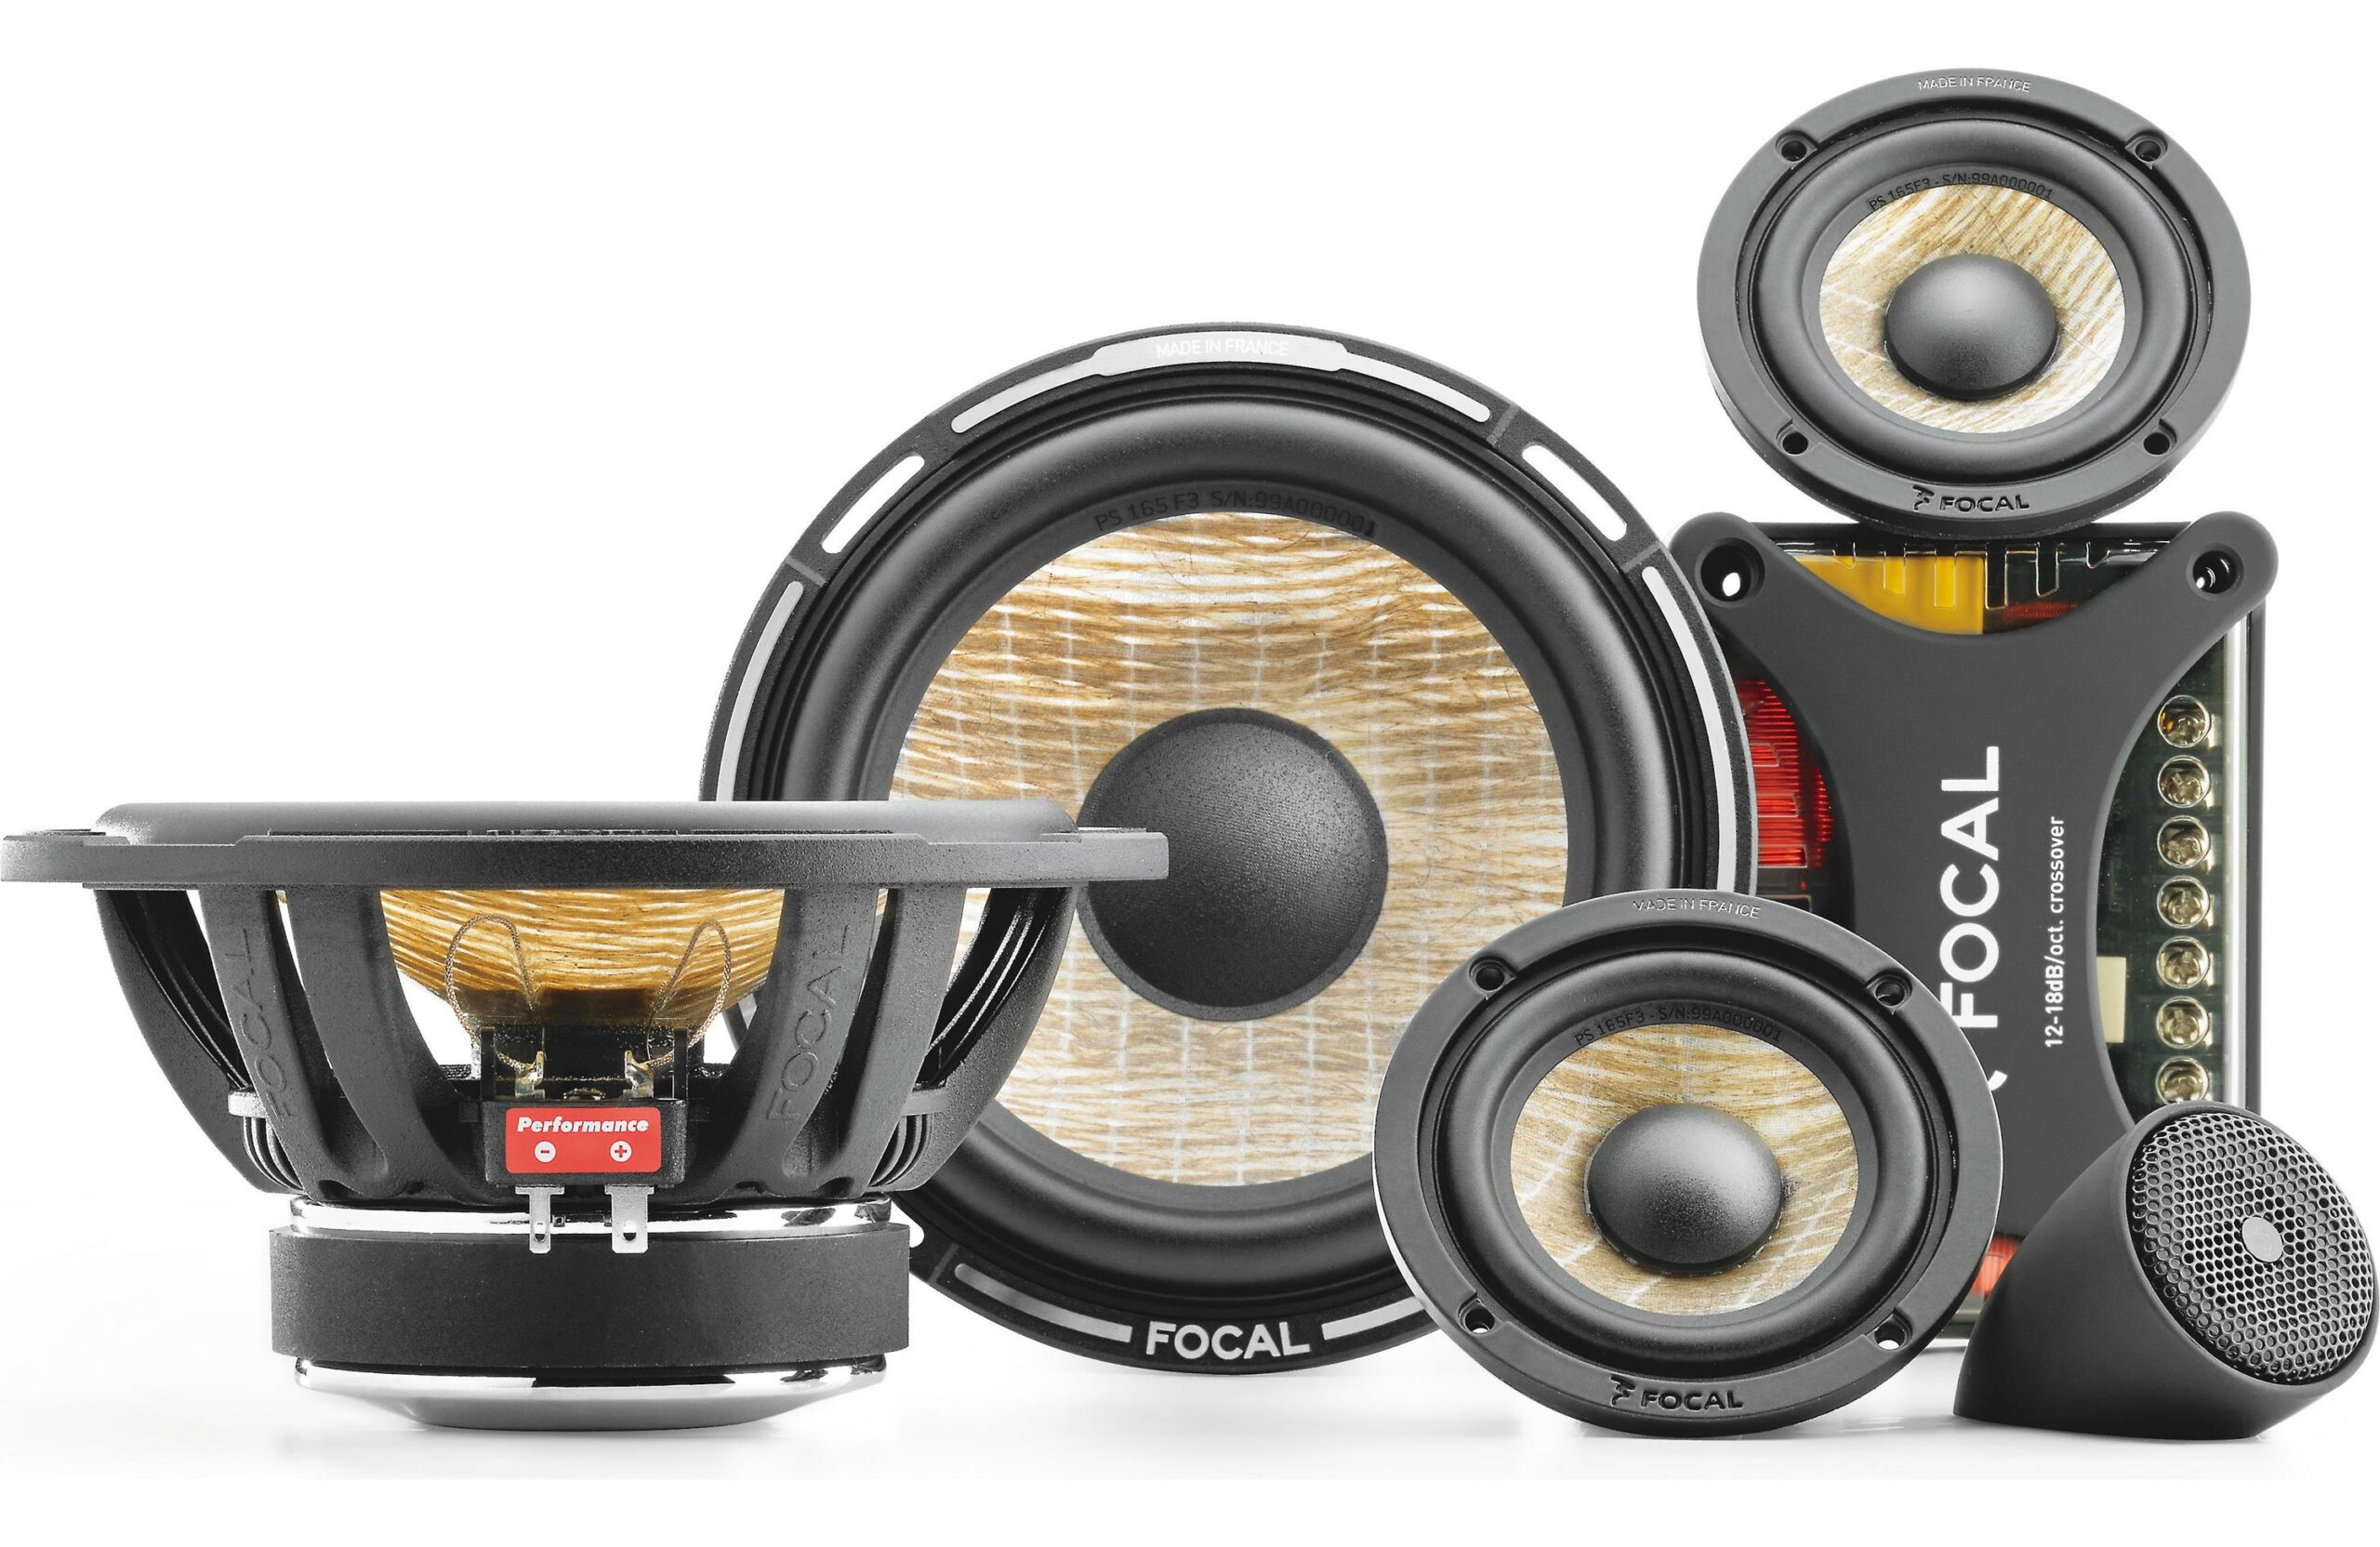 Focal: A Symphony of Acoustic Artistry and Innovation